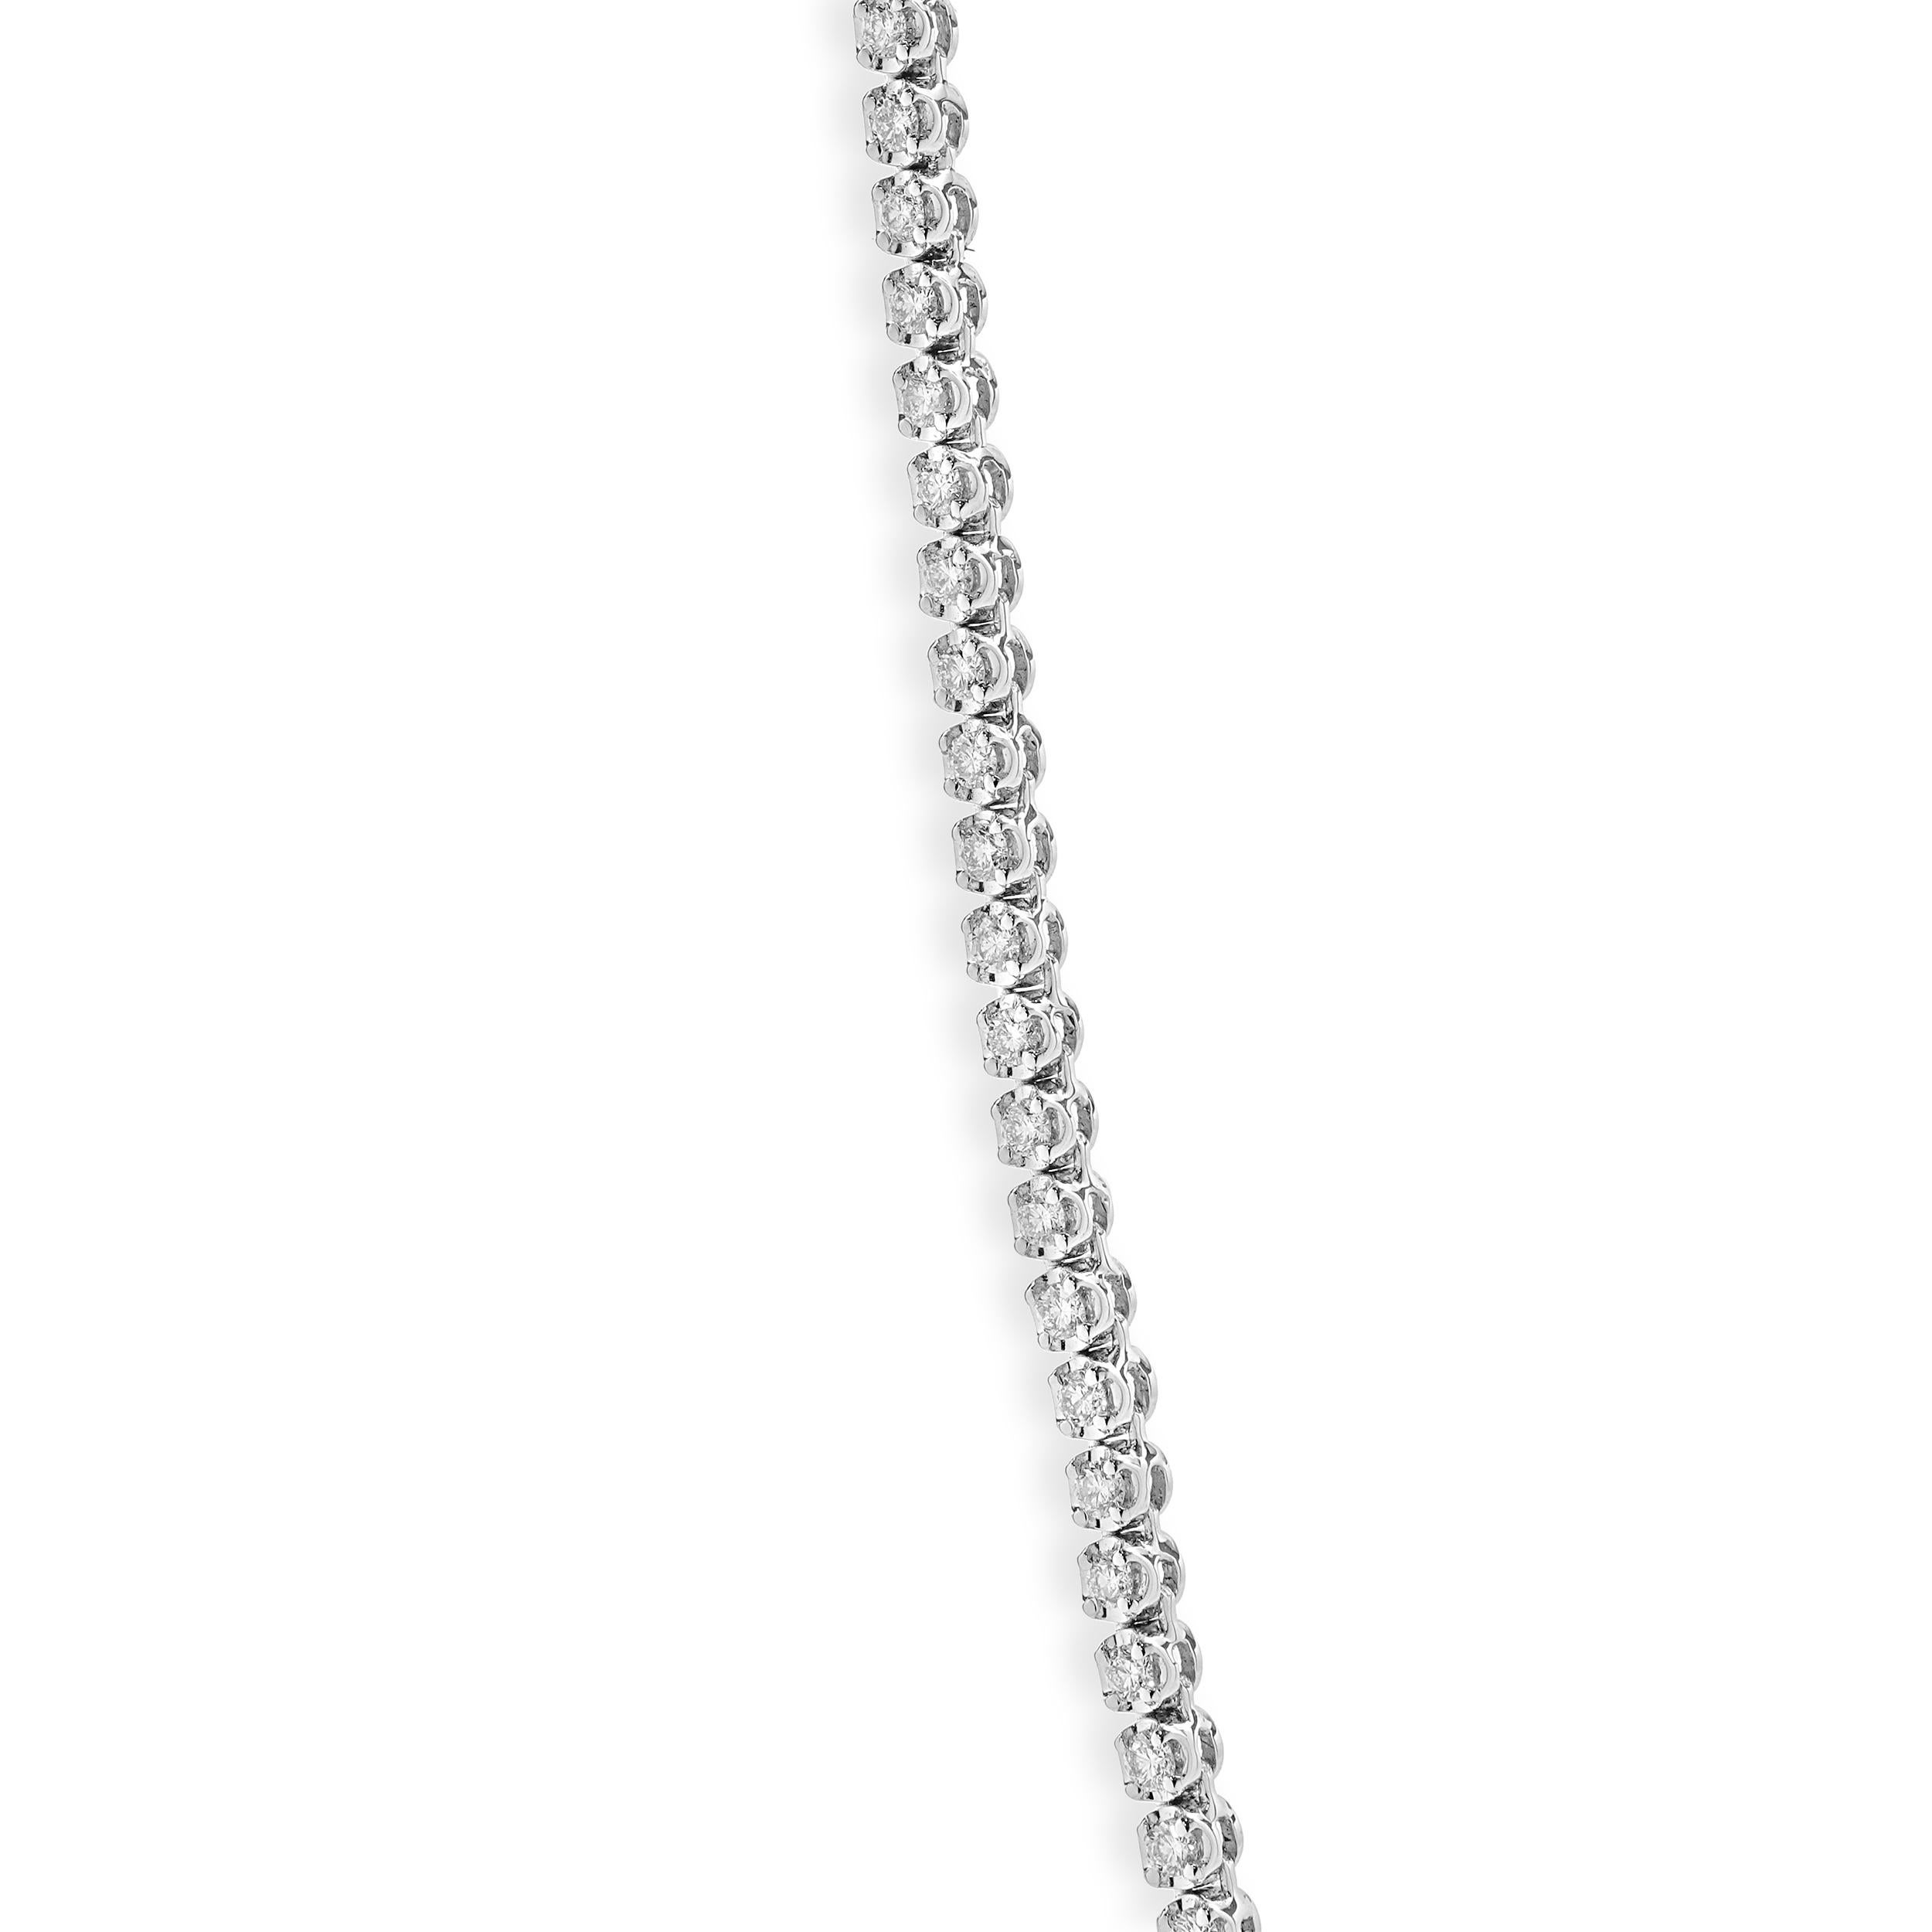 Designer: custom
Material: 14K white gold
Diamond: 178 round brilliant cut = 3.21cttw
Color: G
Clarity: VS
Dimensions: necklace measures 18-inches in length
Weight: 17.68 grams
